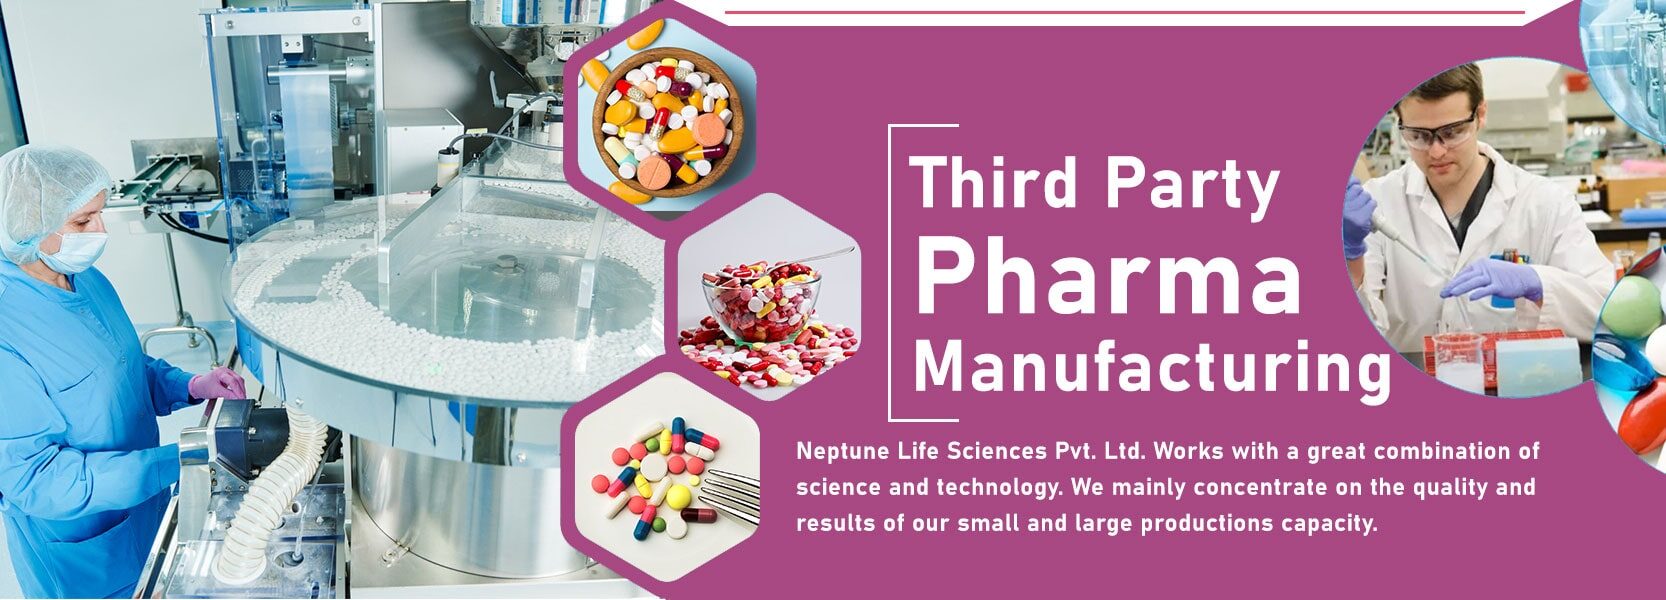 Top Pharma Third Party Manufacturing Company in India